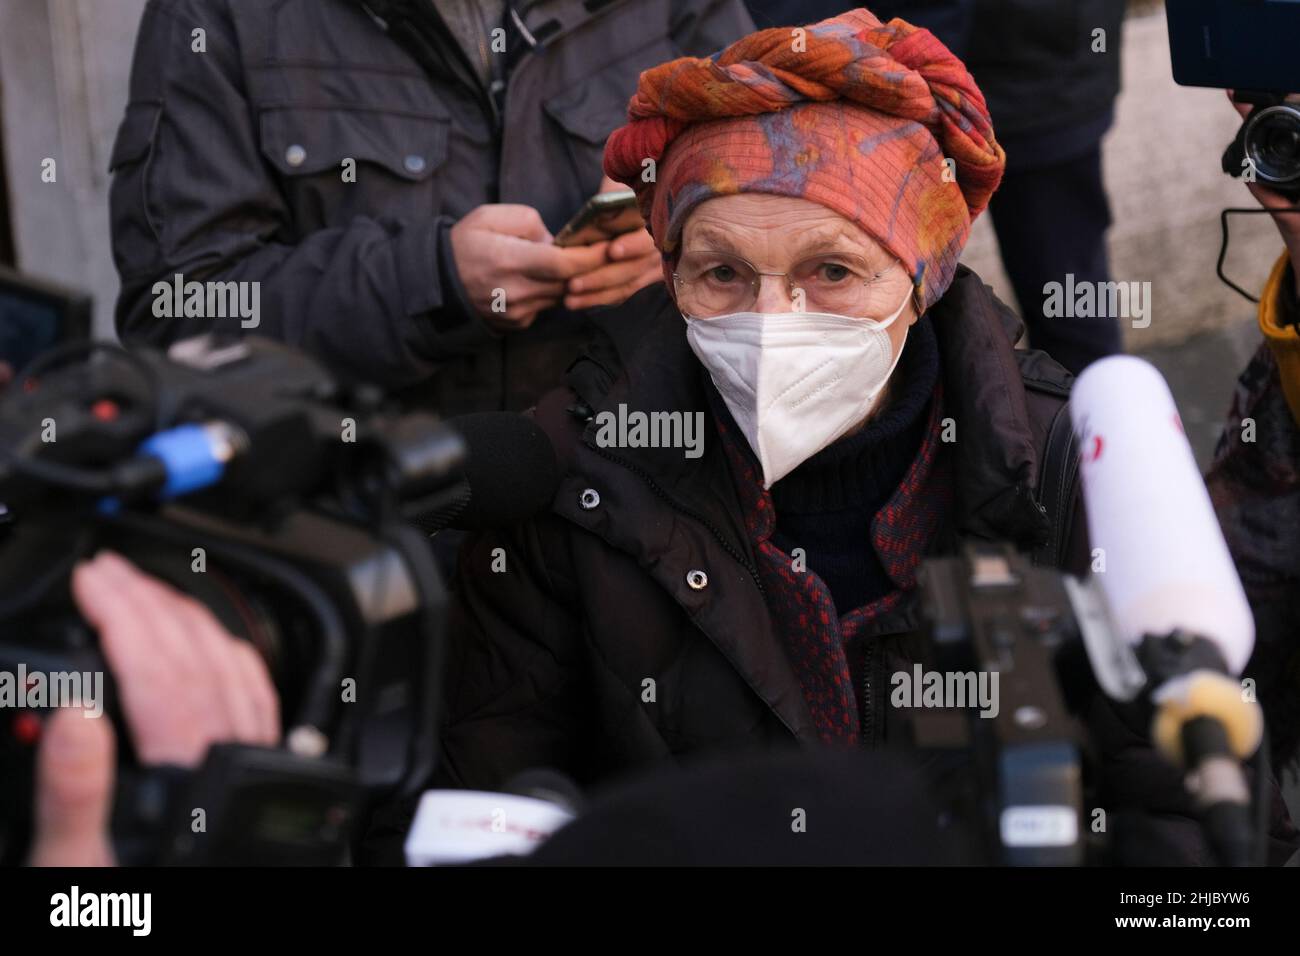 Rome, 27 January 2021 Emma Bonino is an Italian politician, one of the most important figures of Italian liberal radicalism in the Republican era and a leading figure in Italian feminism. during the fourth day of voting for the election of the head of state of Italy Stock Photo